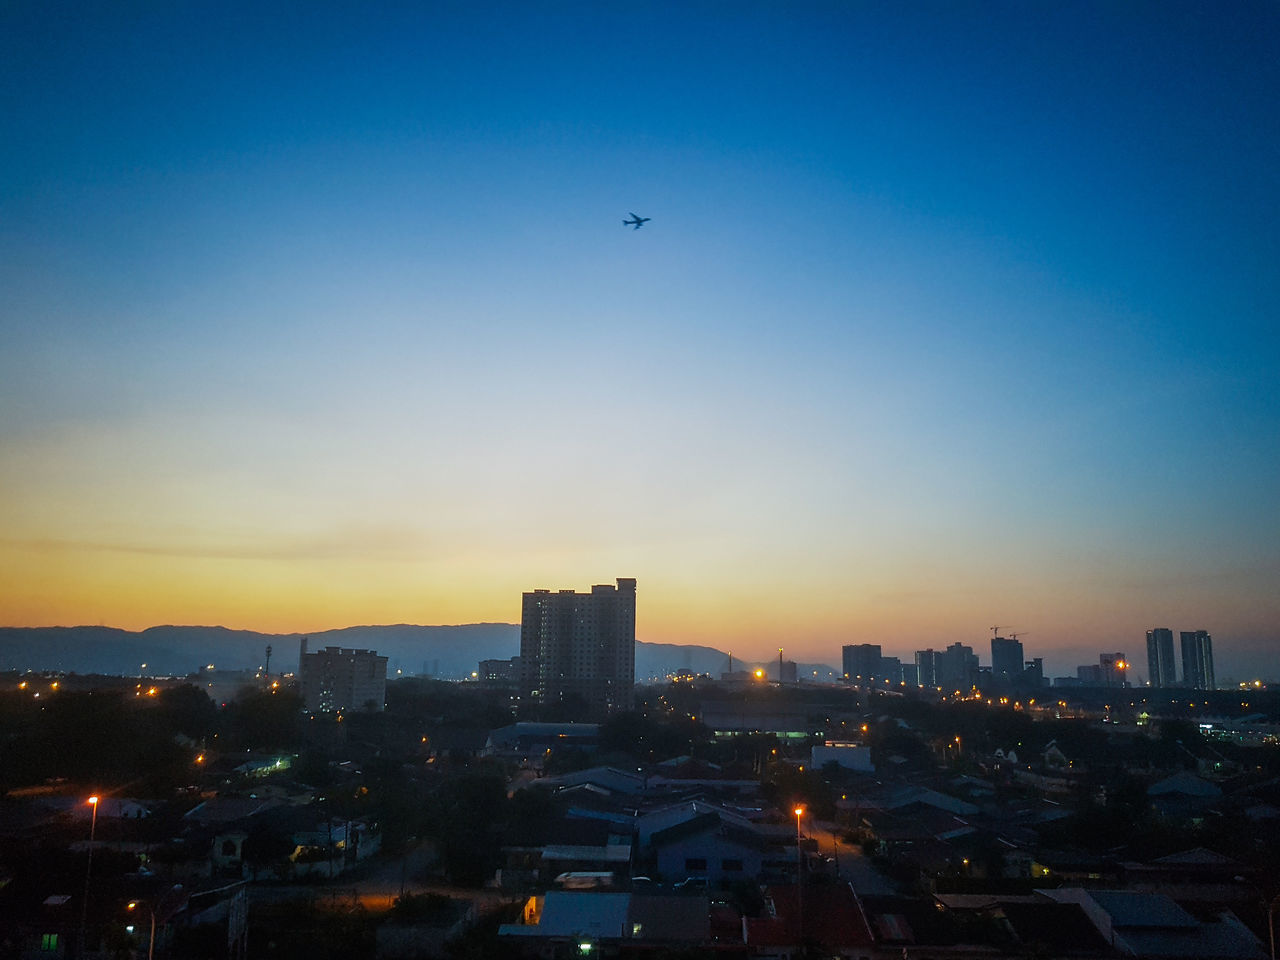 AIRPLANE FLYING OVER BUILDINGS AGAINST SKY DURING SUNSET